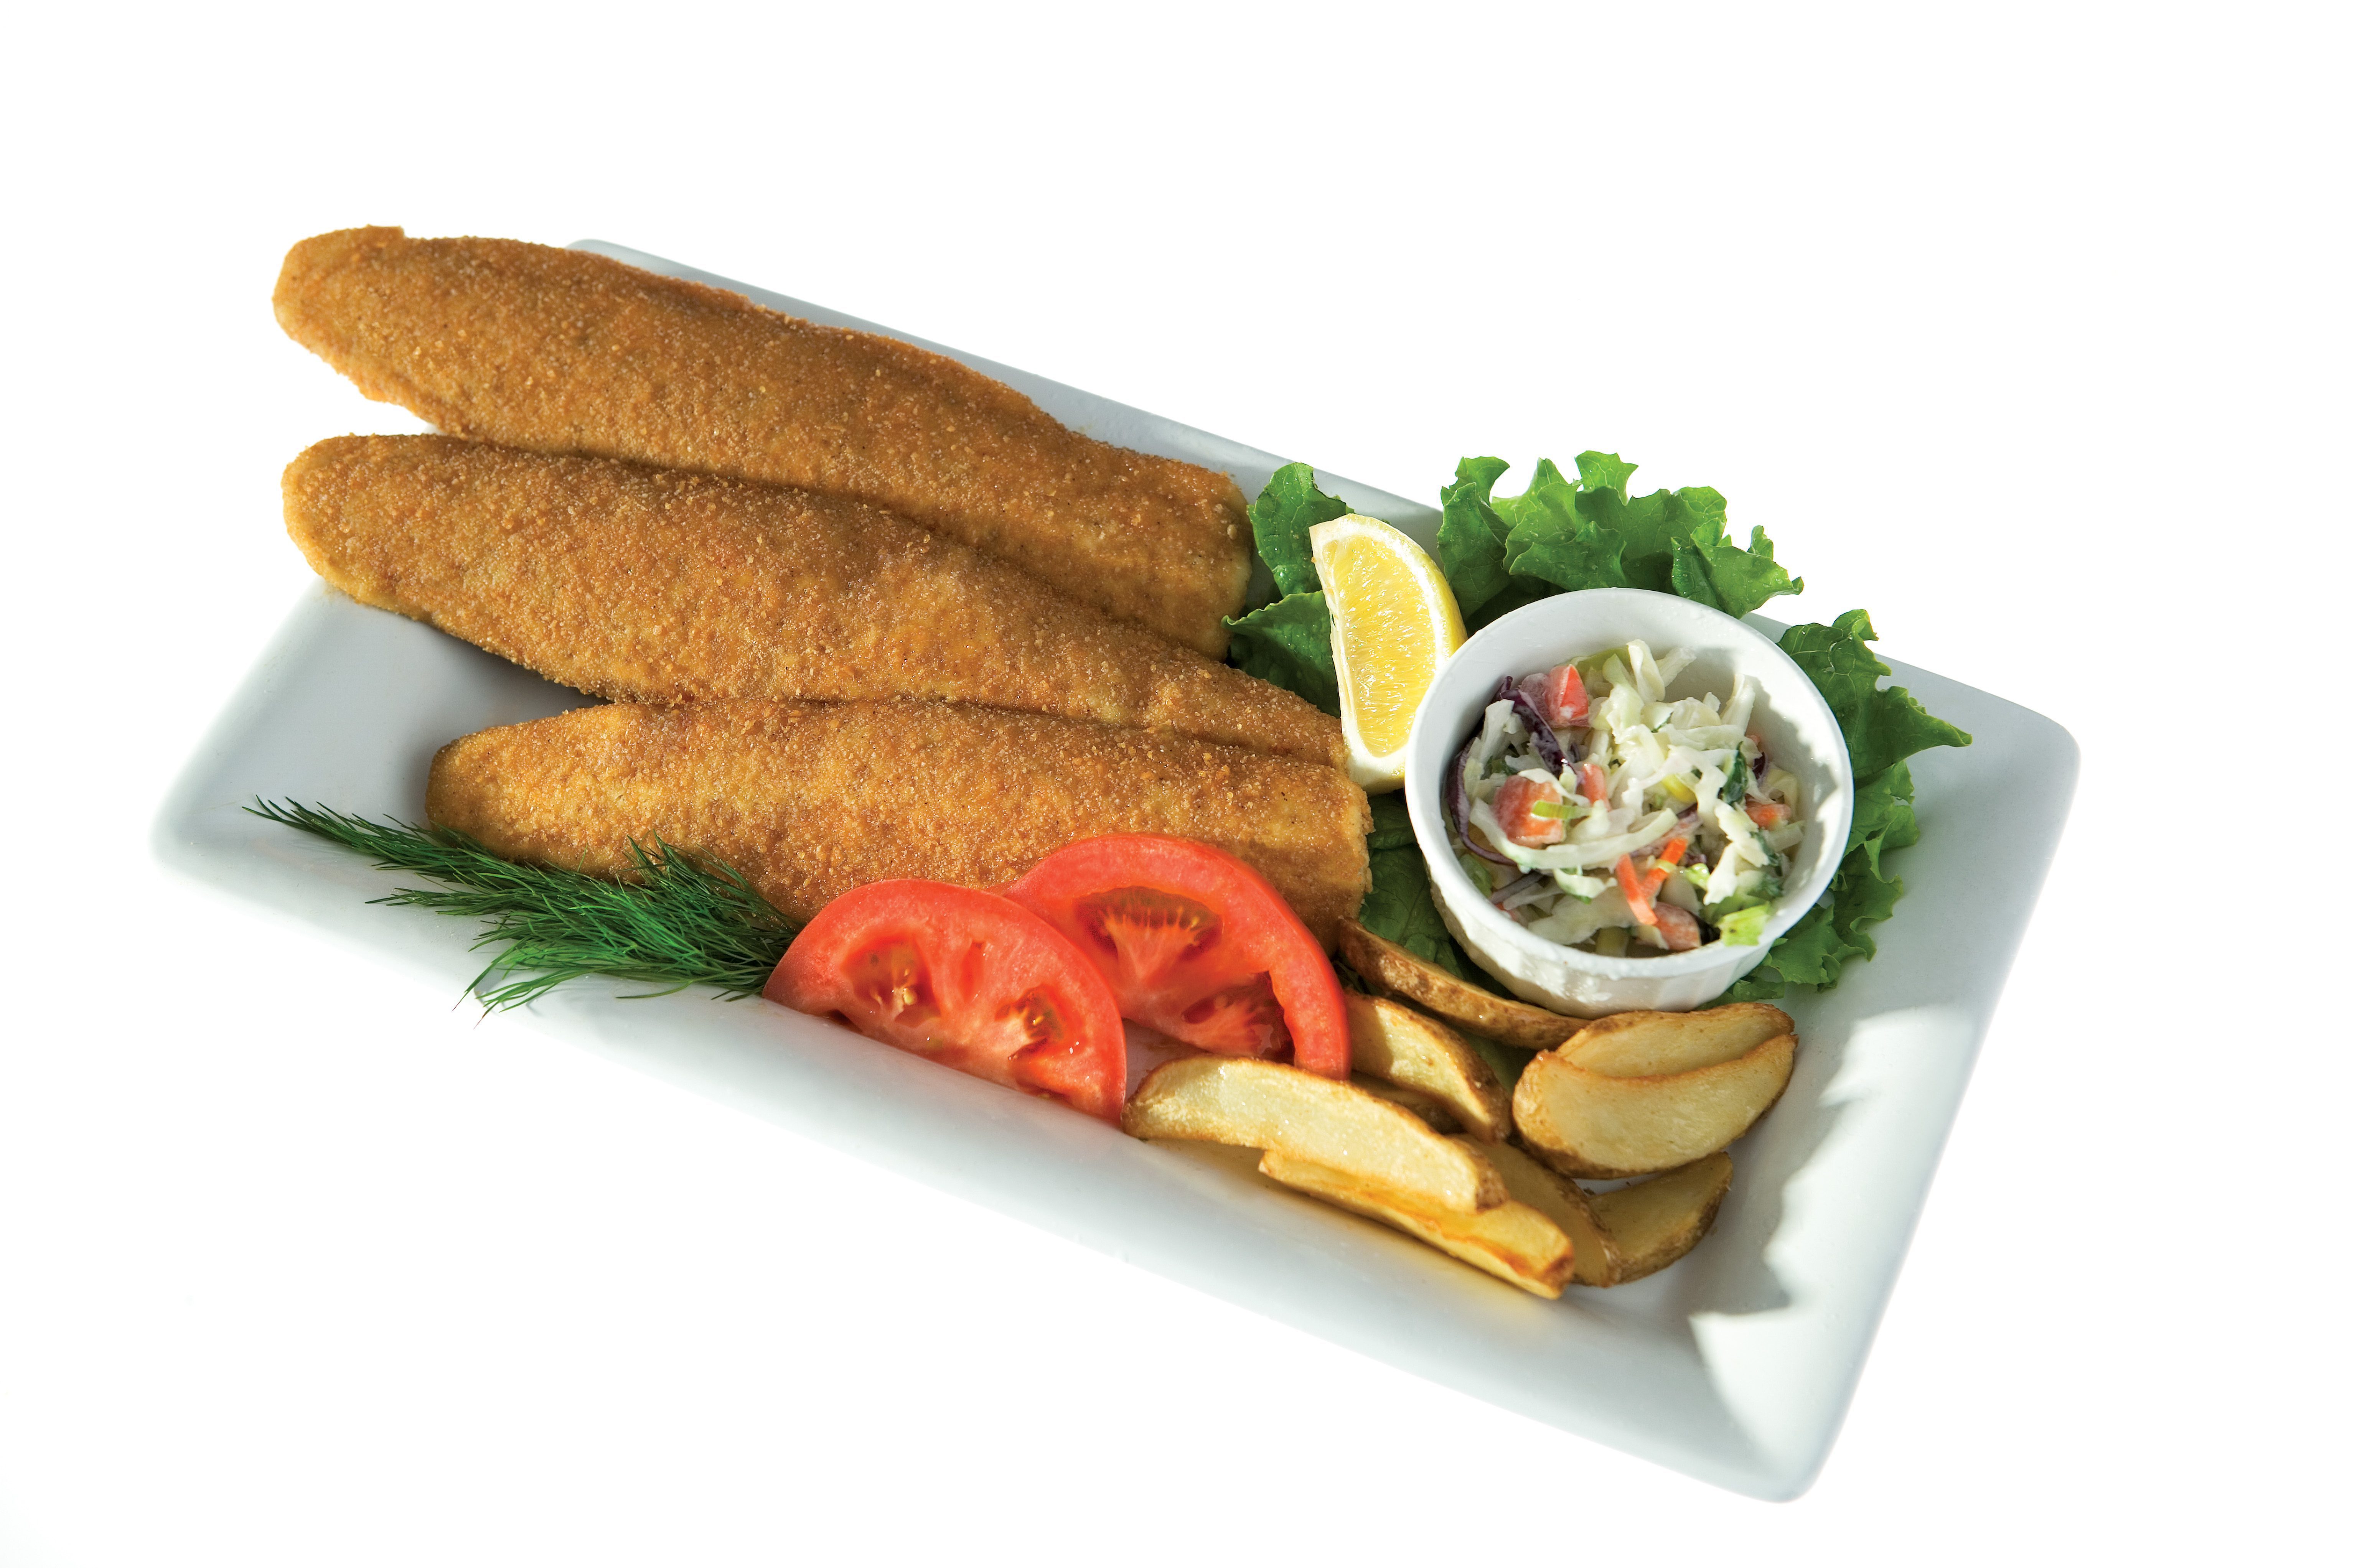 Breaded Fish Products on white plate